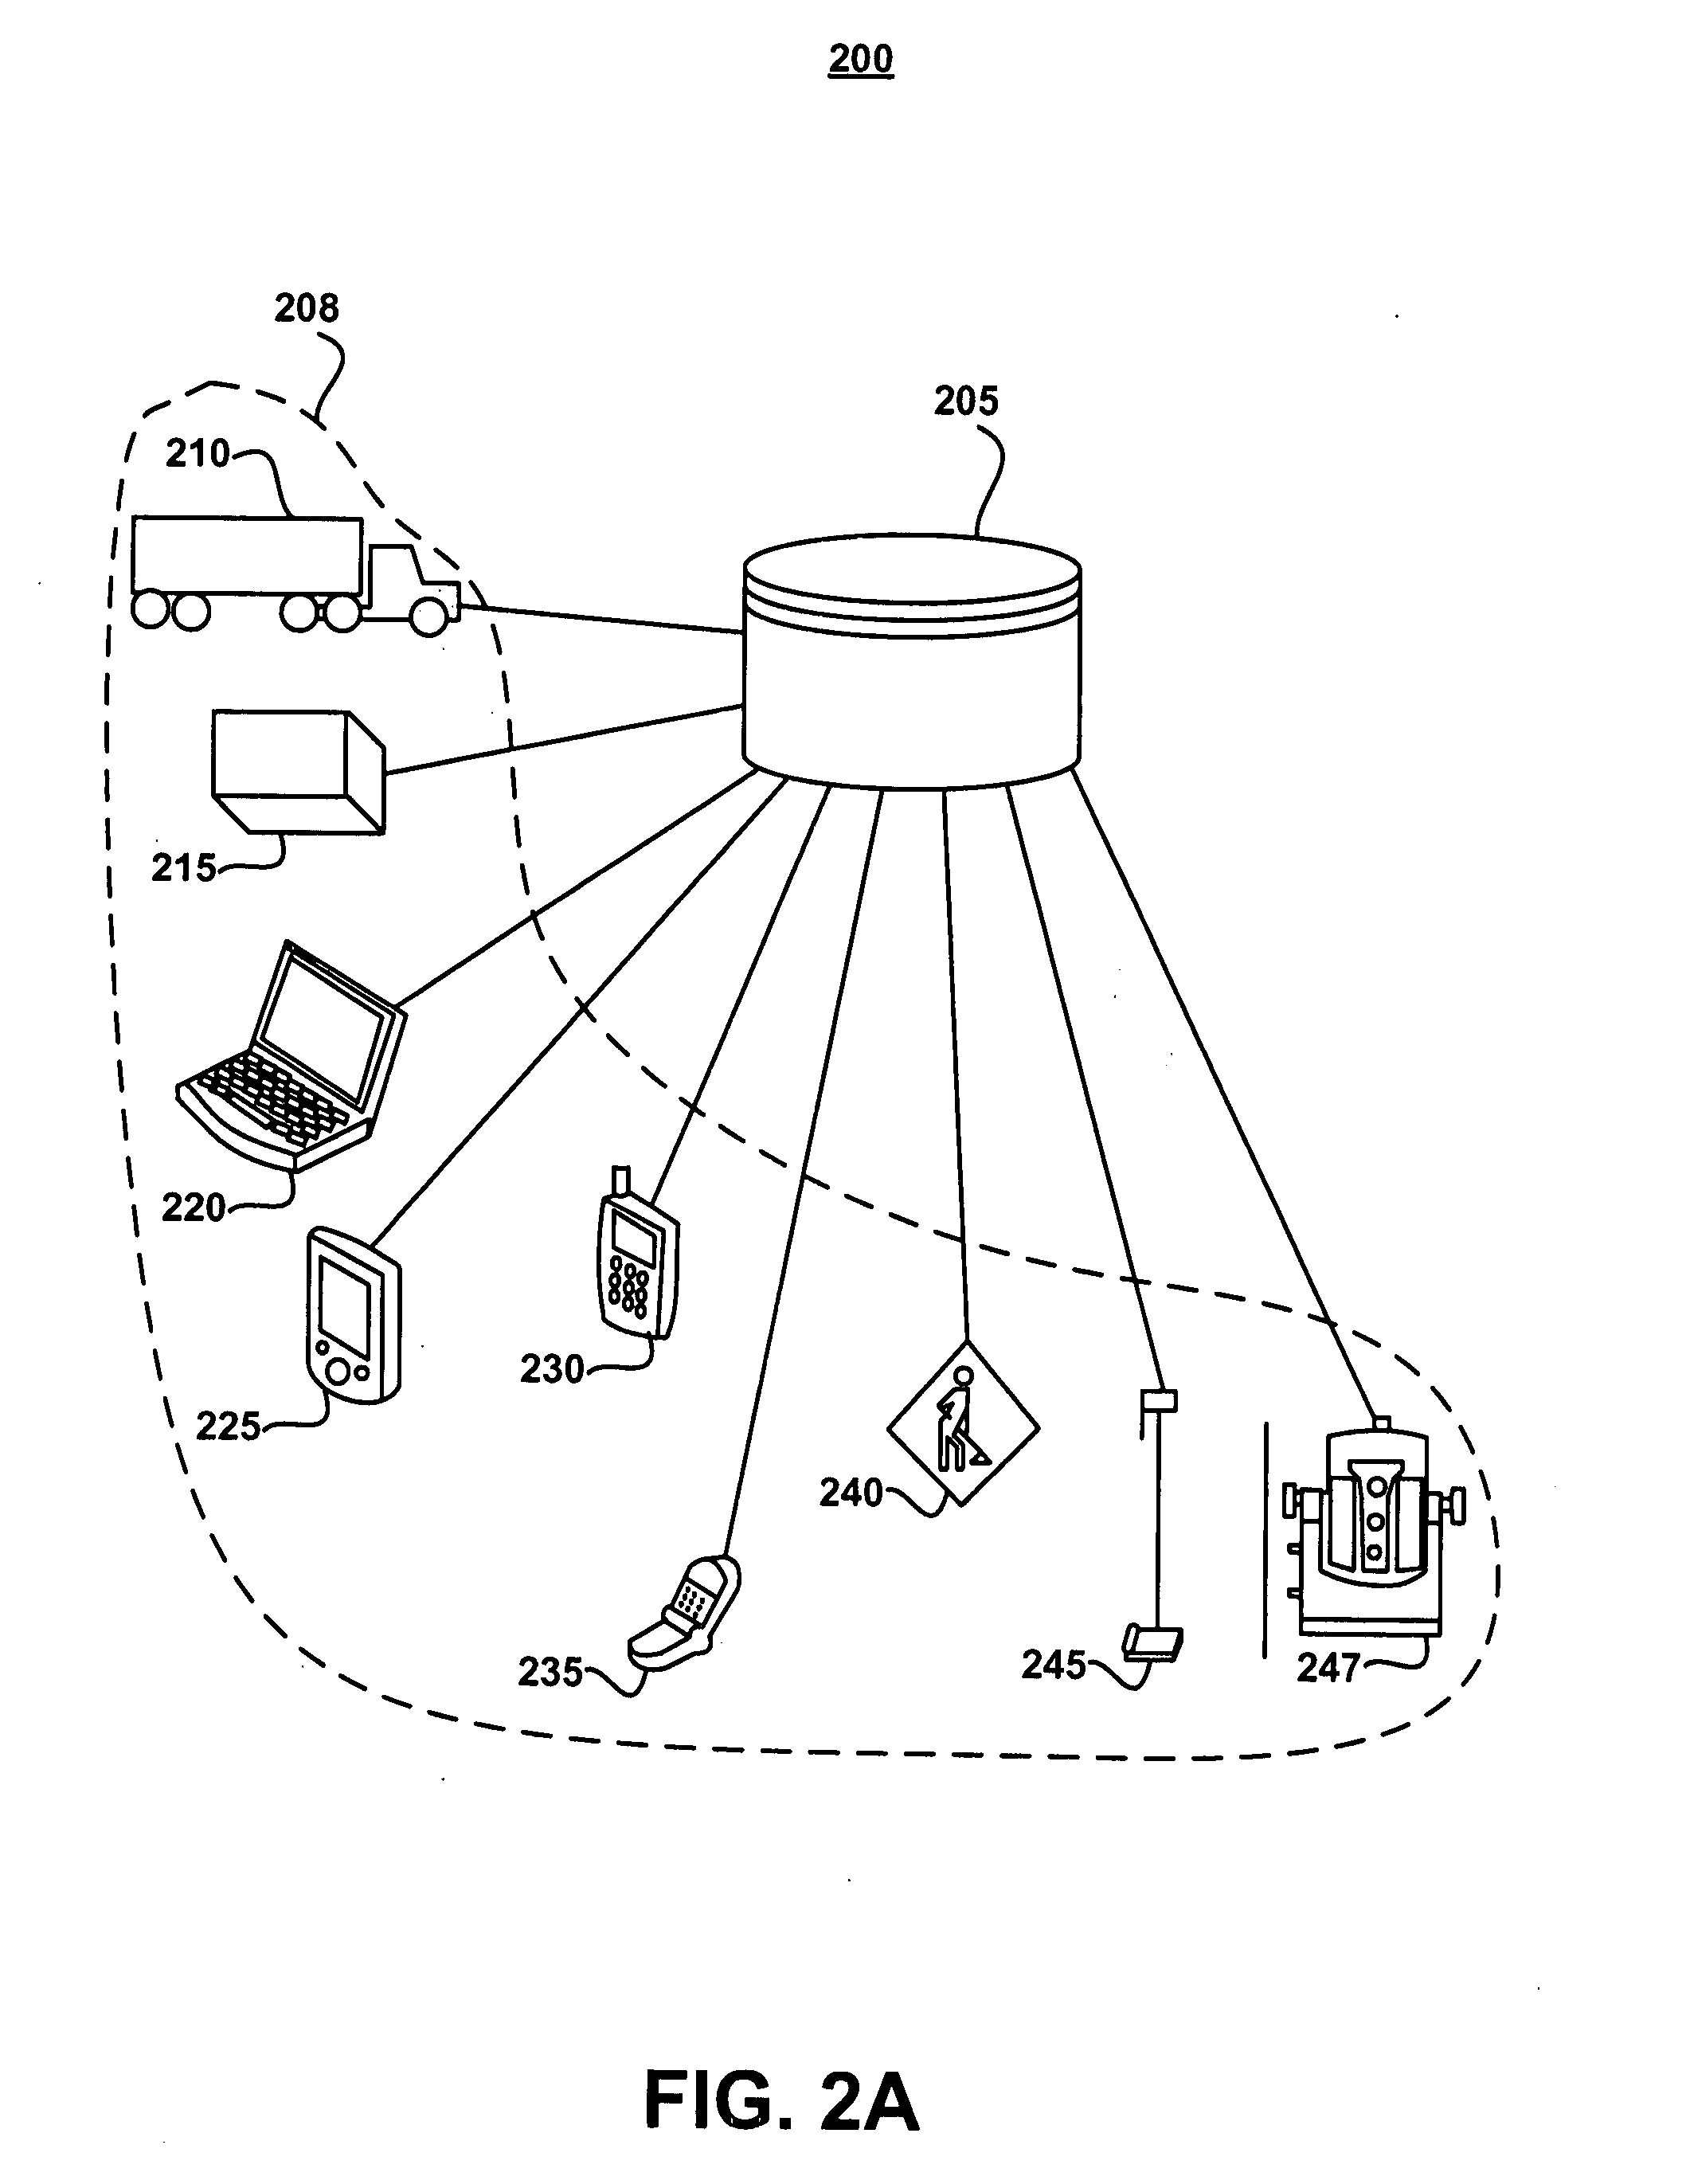 Method for delivering tailored asset information to a device